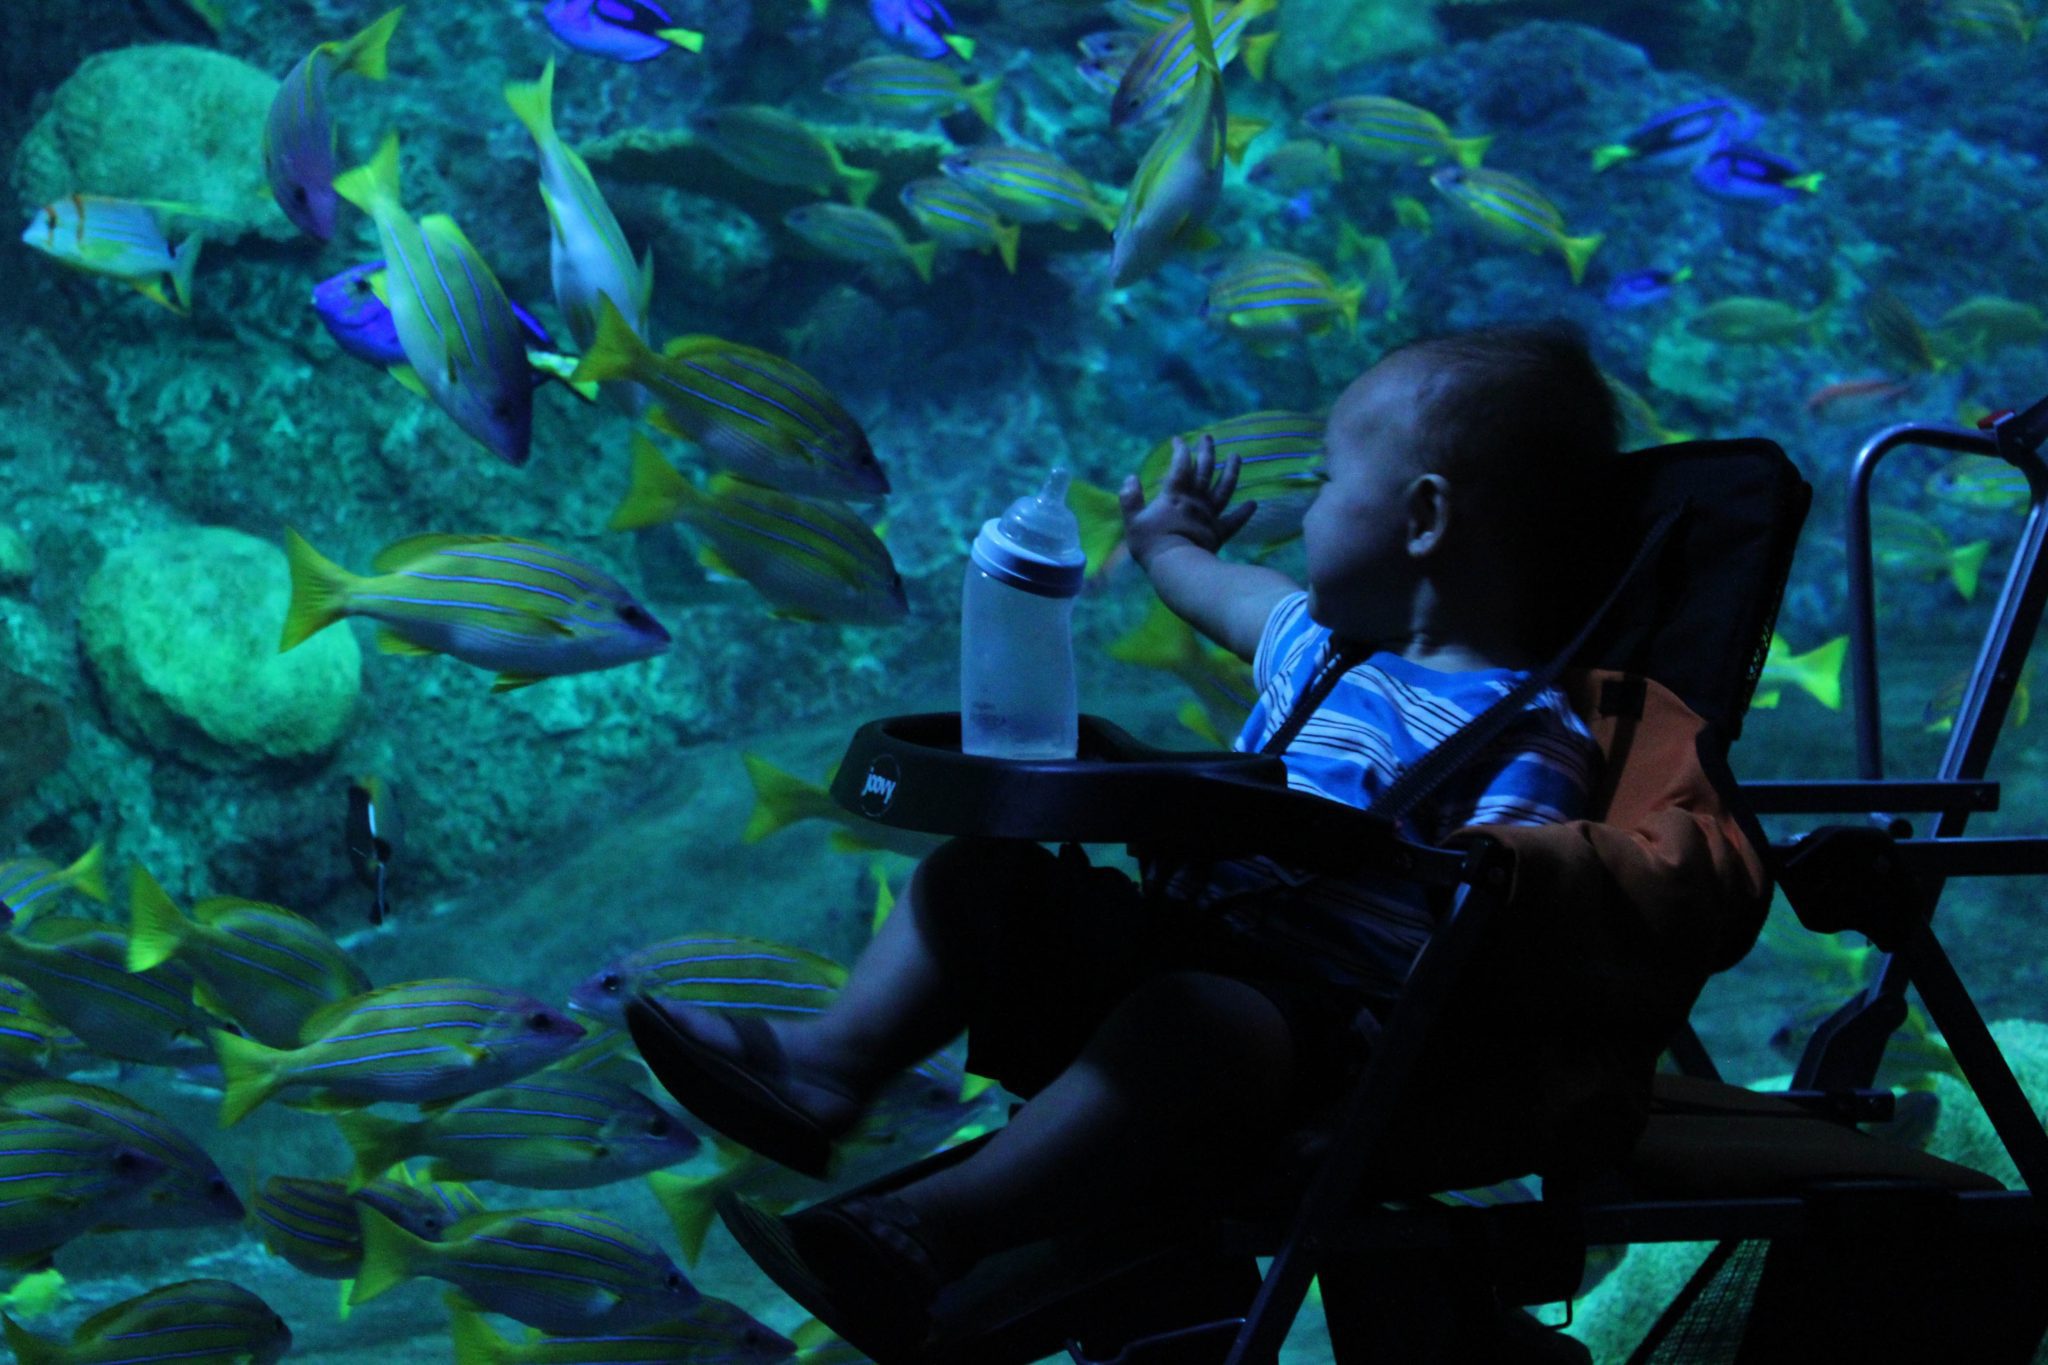 Best nature and animal encounters for kids in Phoenix and the East Valley-101 East Valley and Phoenix Kids activities #phoenix #odyseaaquarium